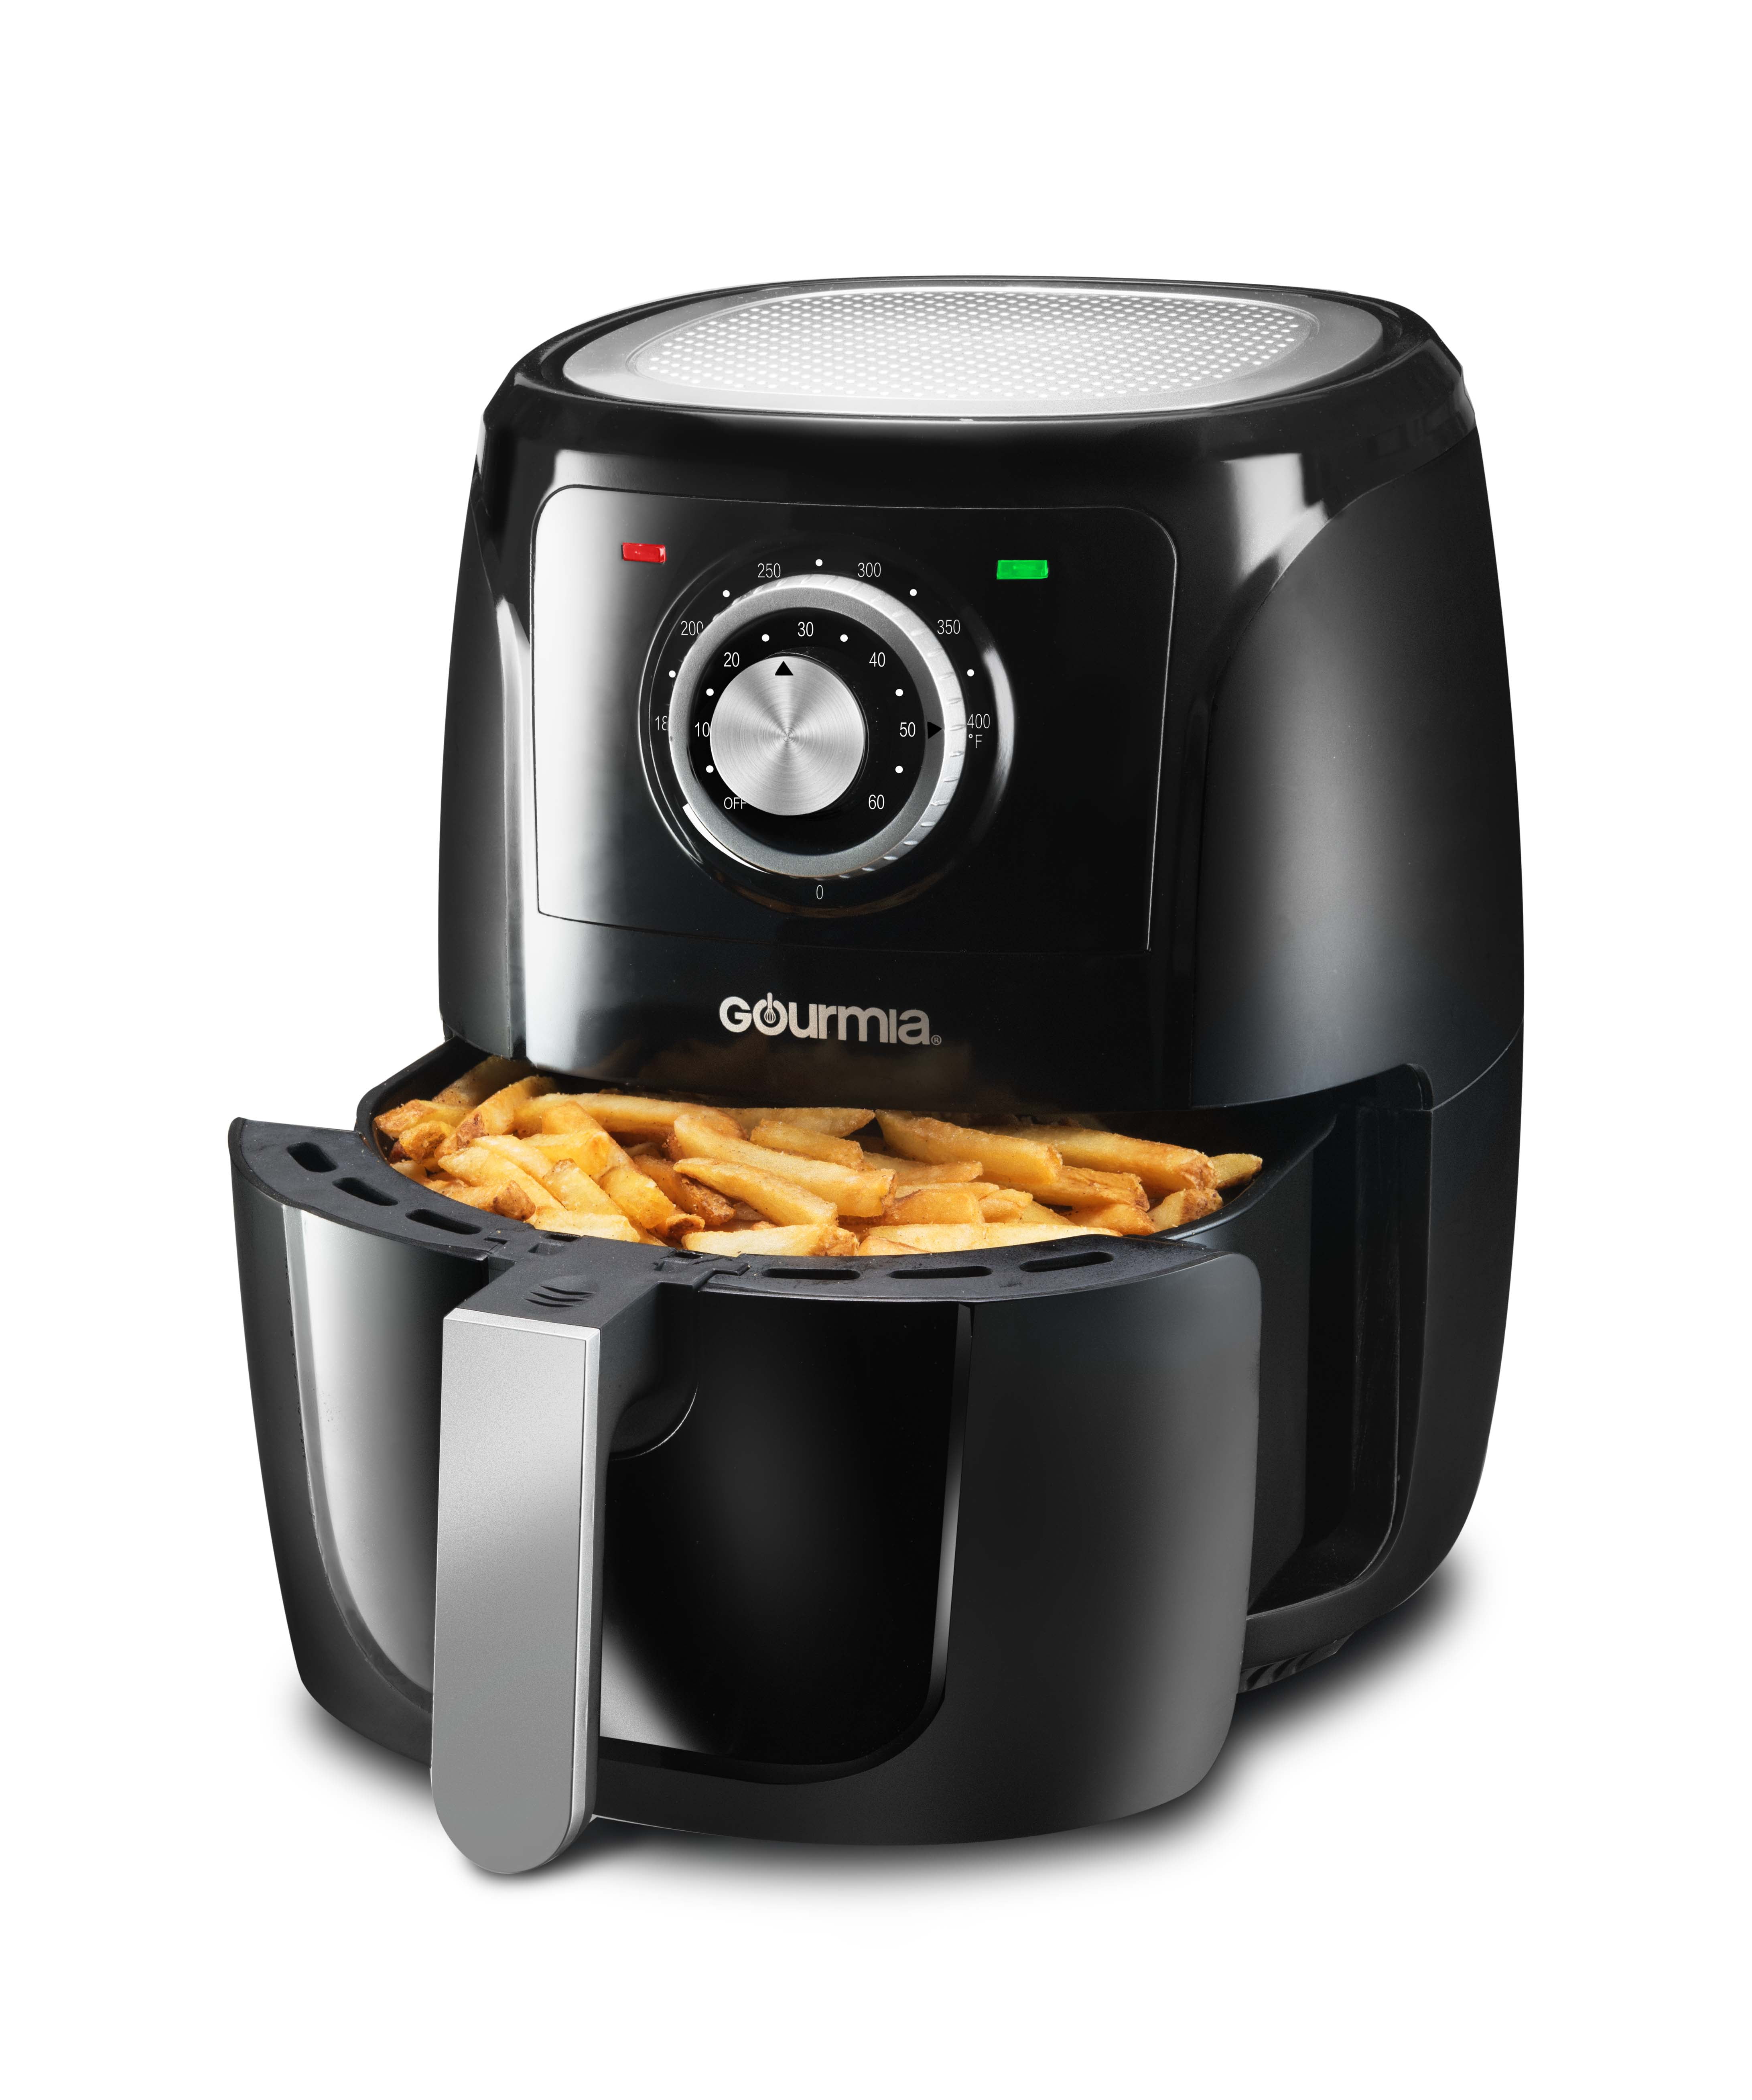 Gourmia Air Fryers can now be found in @Walmart! #ad 🎉 I've